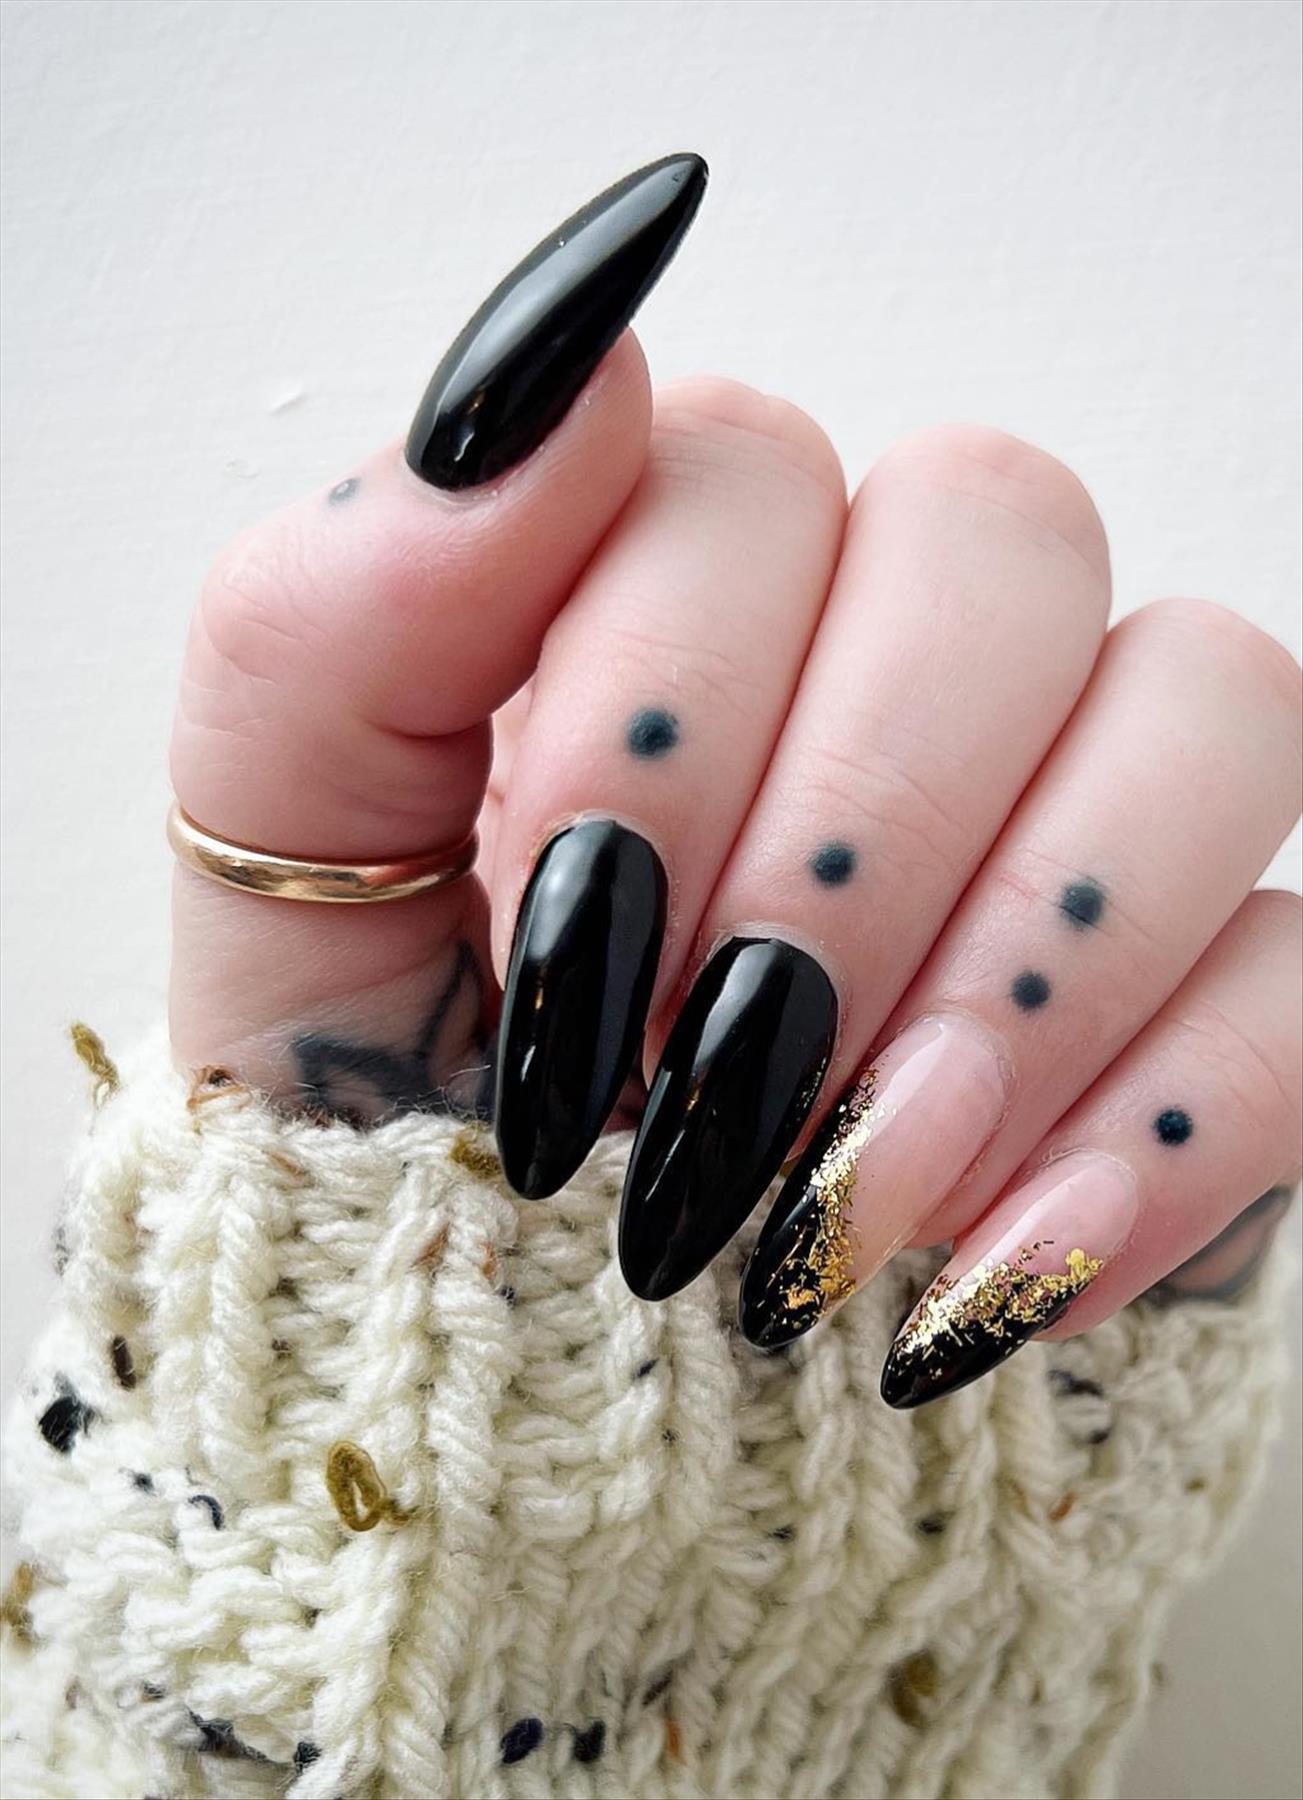 Elegant Black Nail Art Designs to Keep Your Style On Point